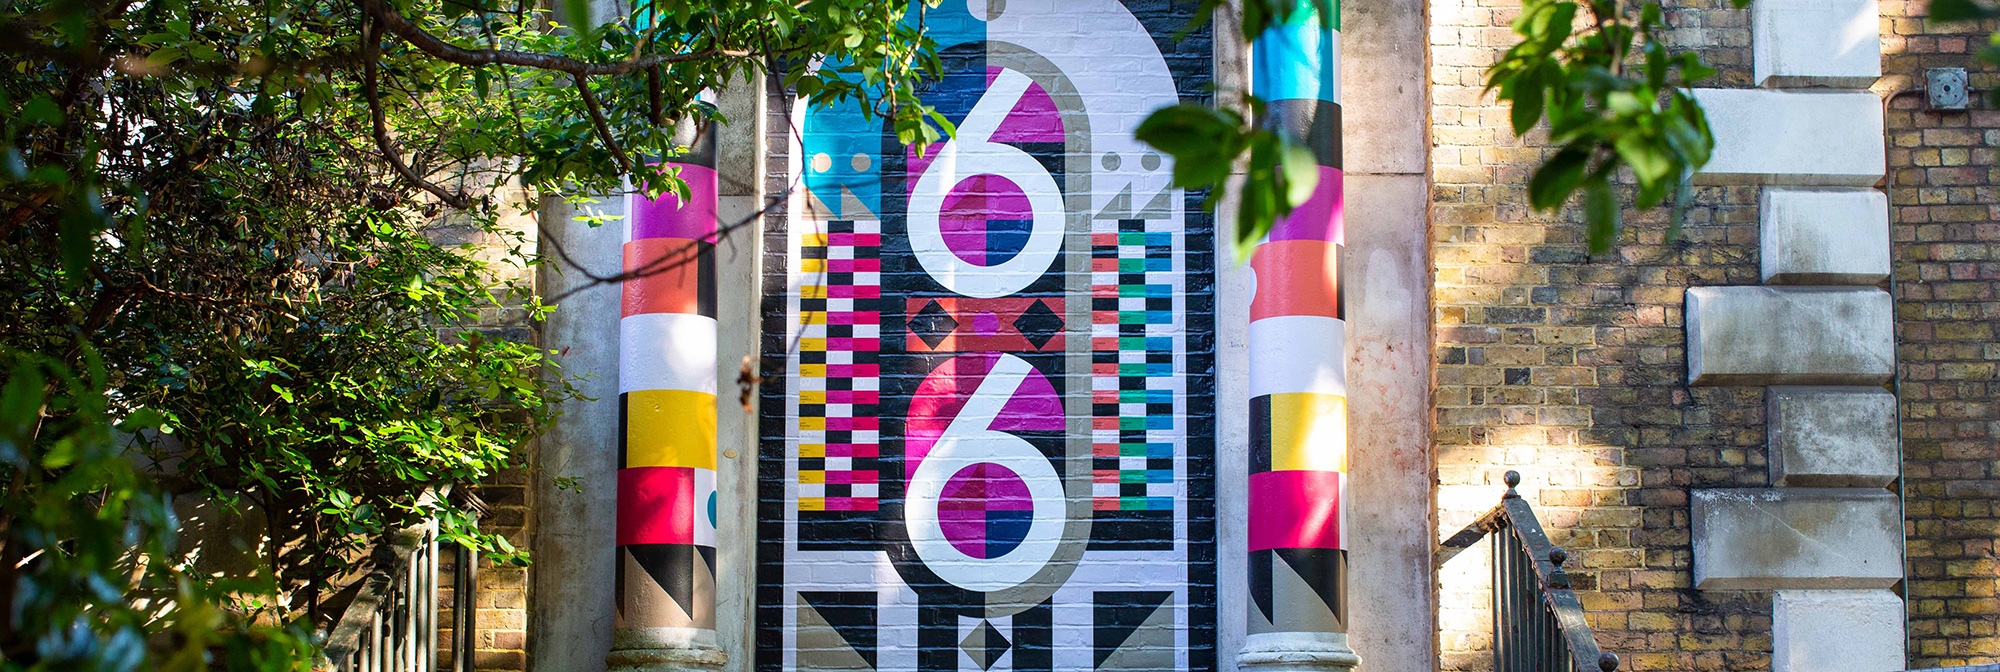 Colourful graphics painted on wall by Chelsea BA Graphic Design Communication student as part of Clerkenwell design week.